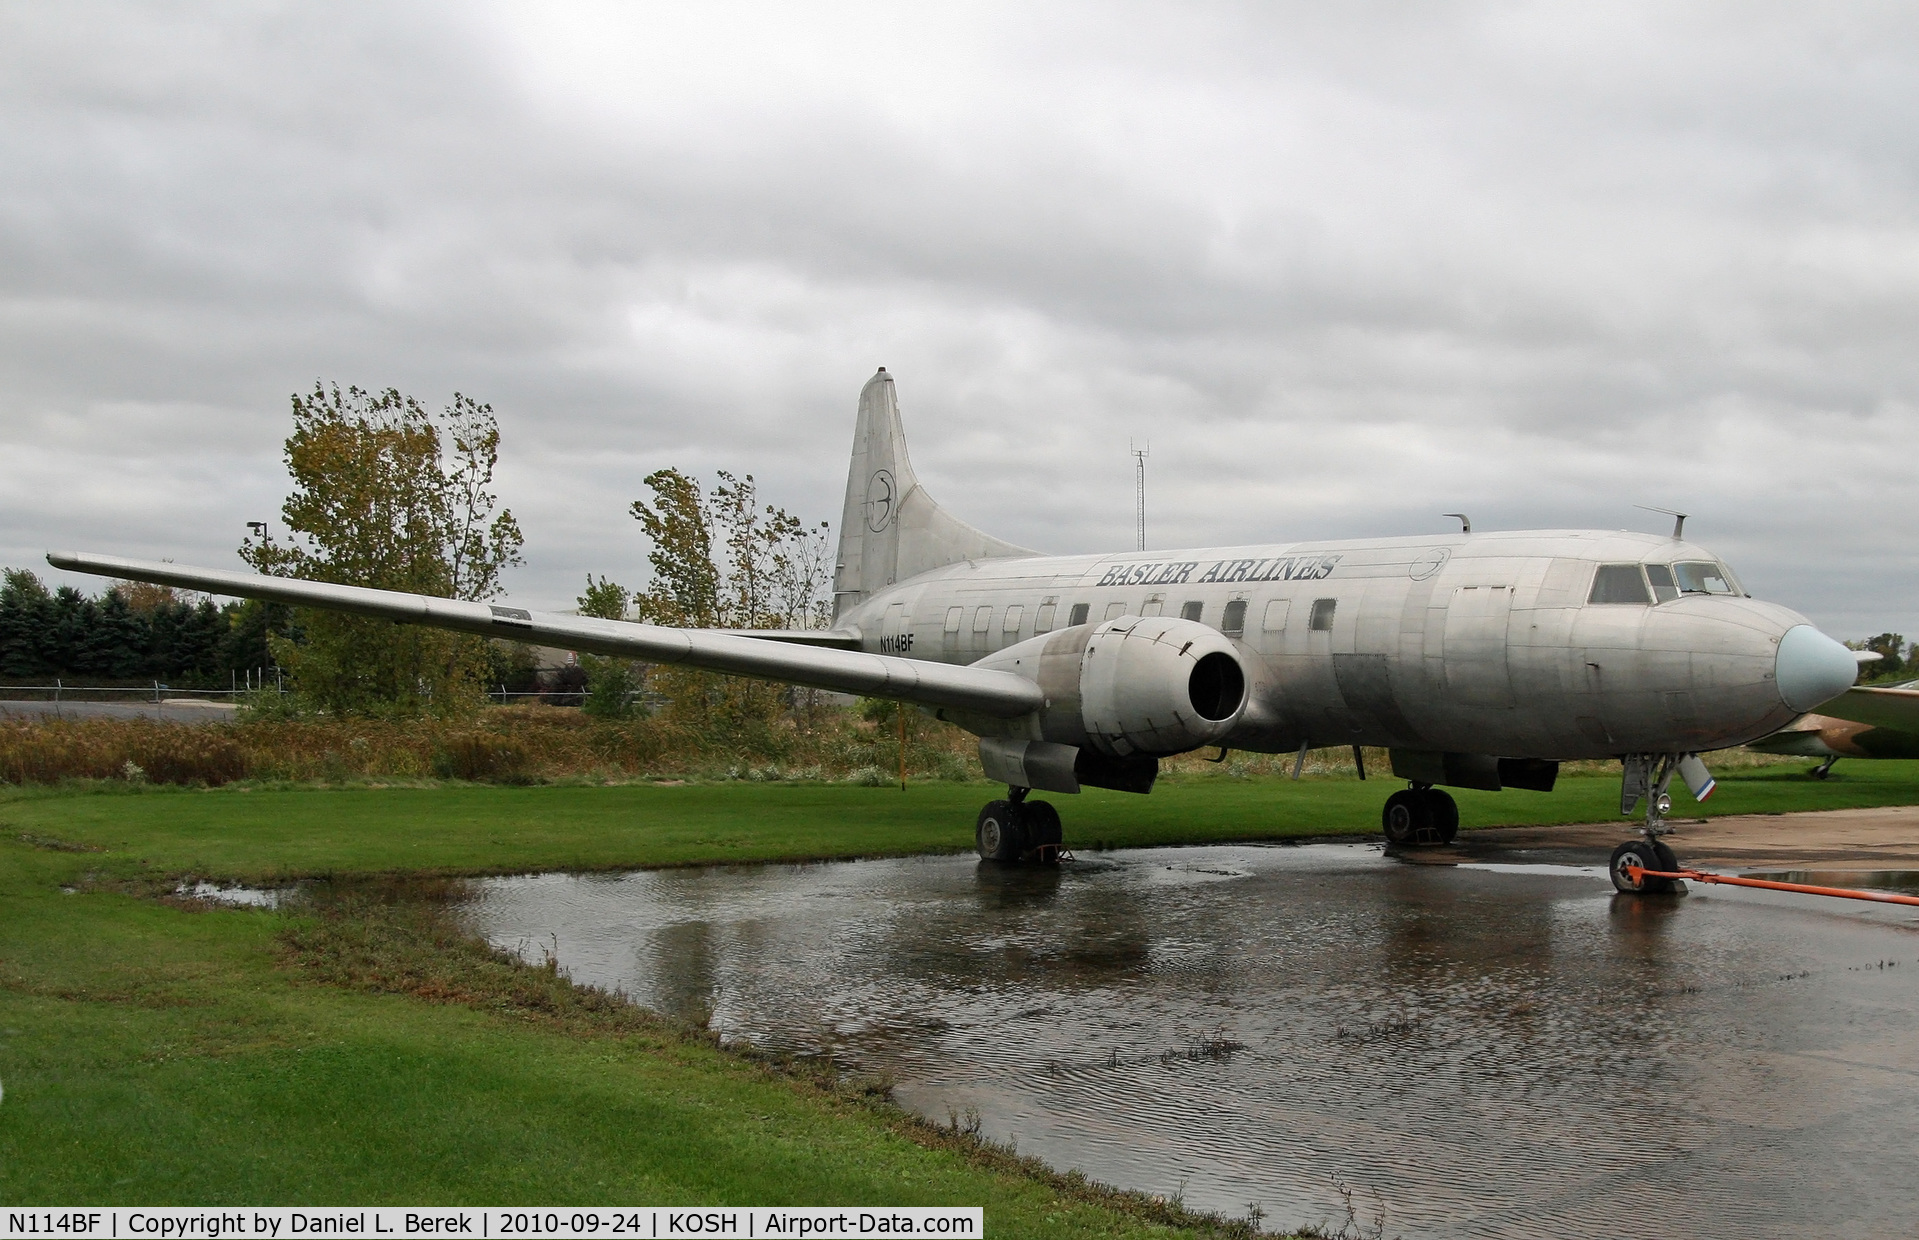 N114BF, 1955 Convair 340 C/N 146, Bereft of its engines, this rare Convairliner sits in a puddle at the Balser compound at Oshkosh.